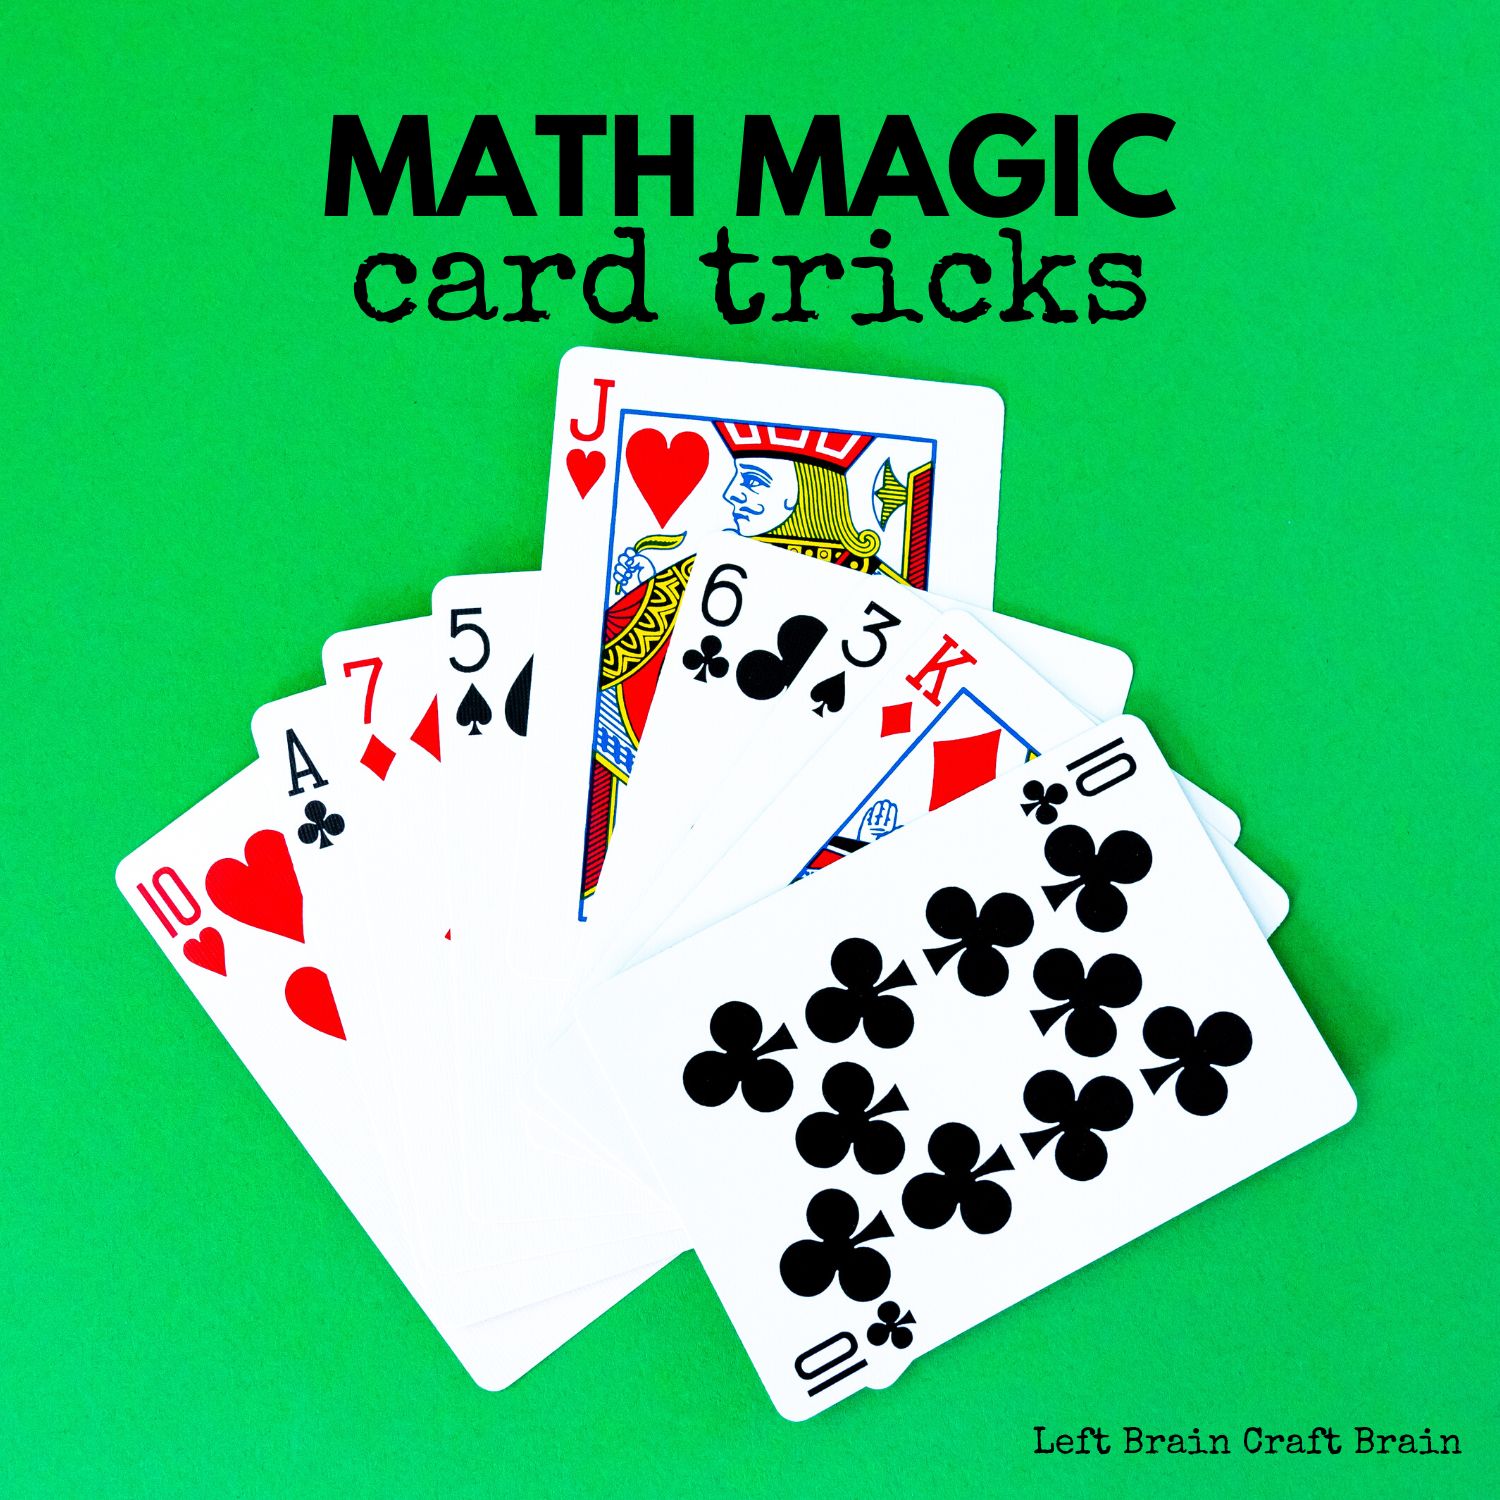 Practice your math skills while having fun with these easy math magic card tricks. You'll wow the crowd and yourself with these magic tricks!